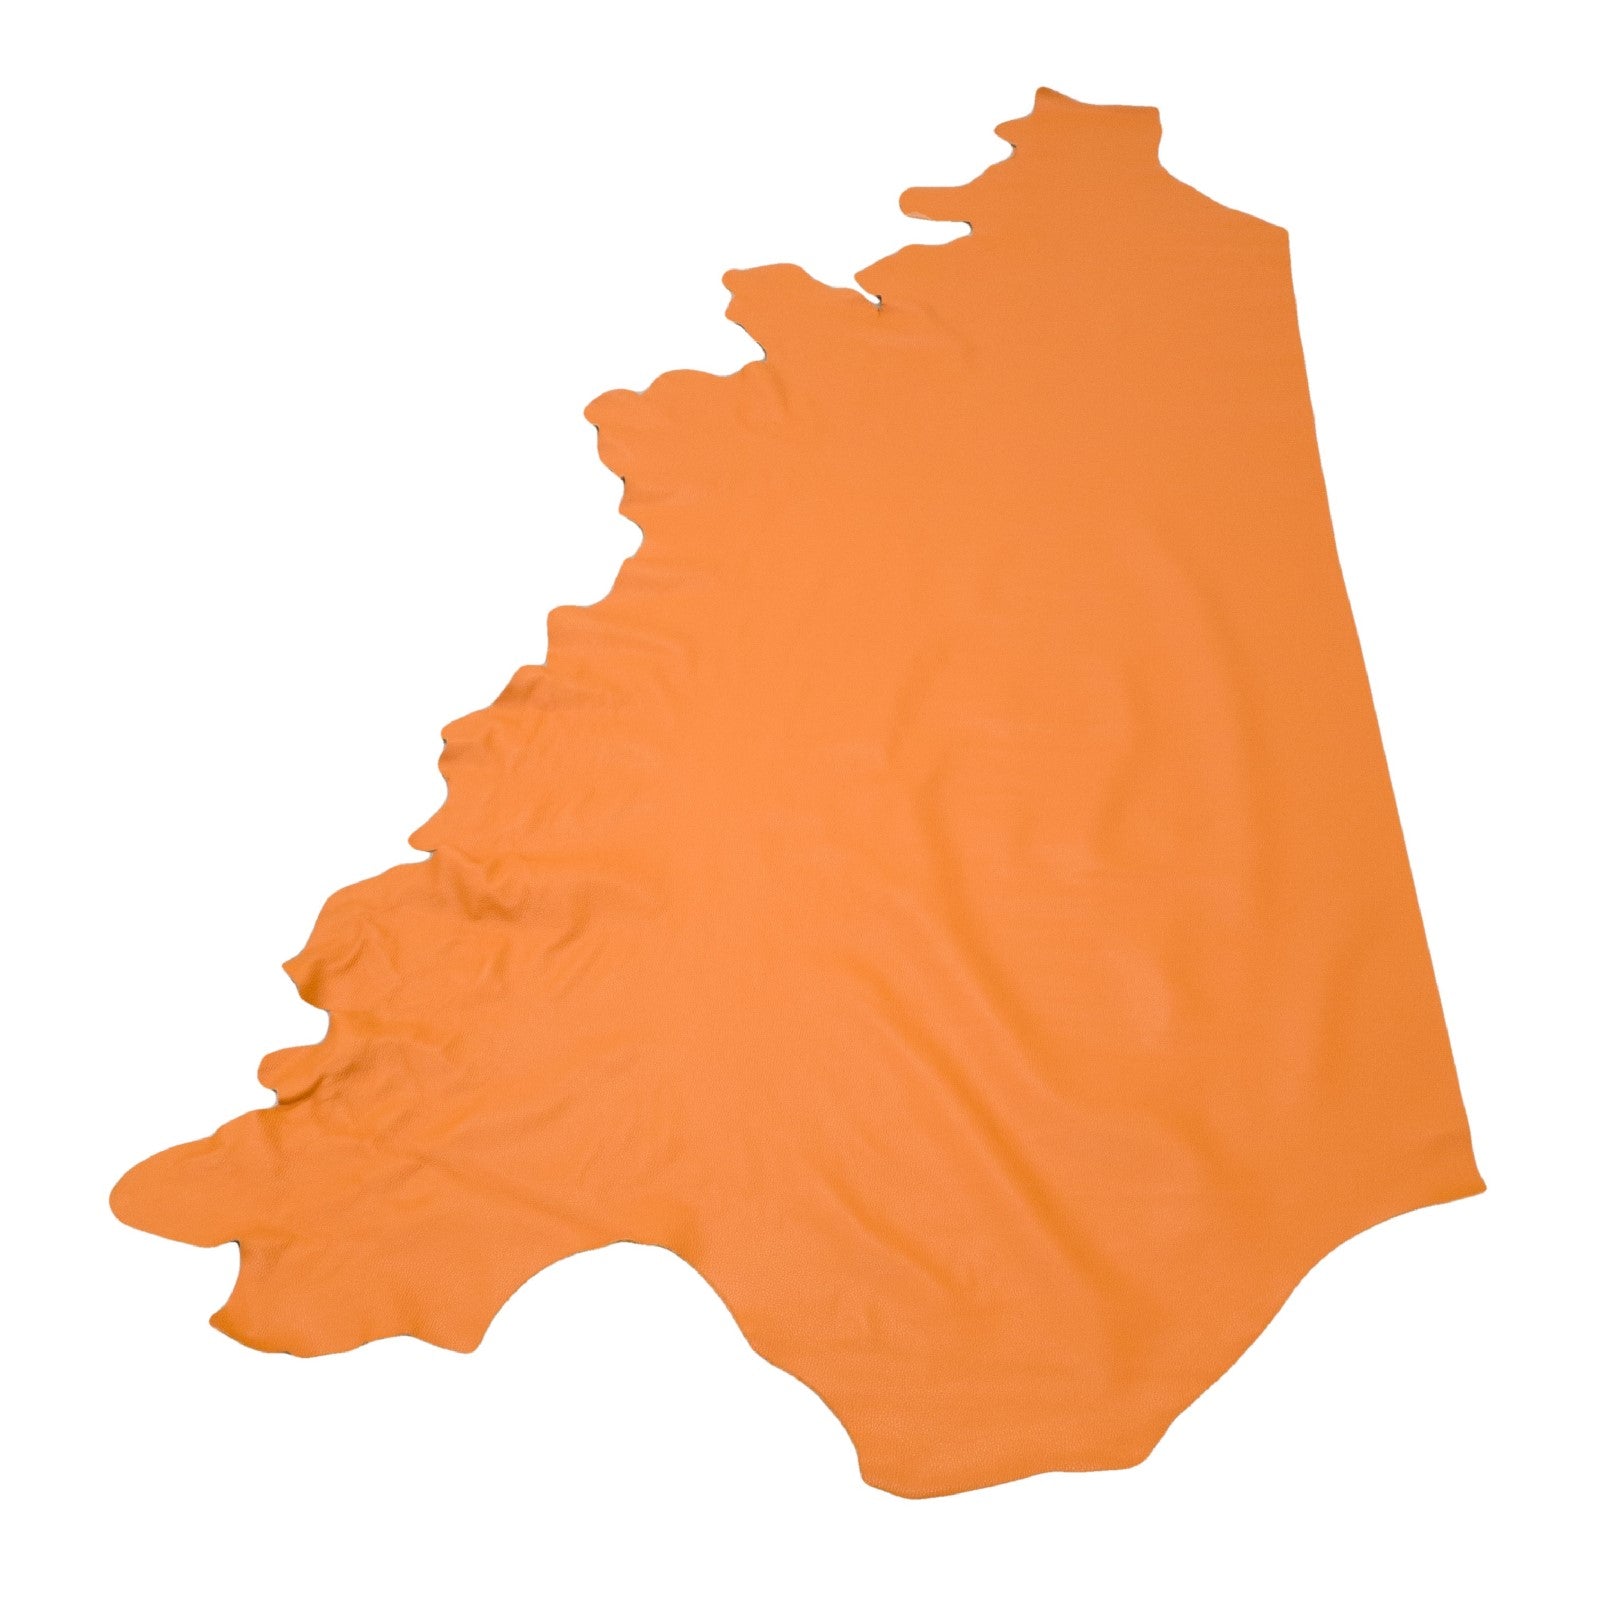 Valencia Orange, 3-4 oz Cow Hides, Tried n True, Side / 30-32 Square Foot | The Leather Guy